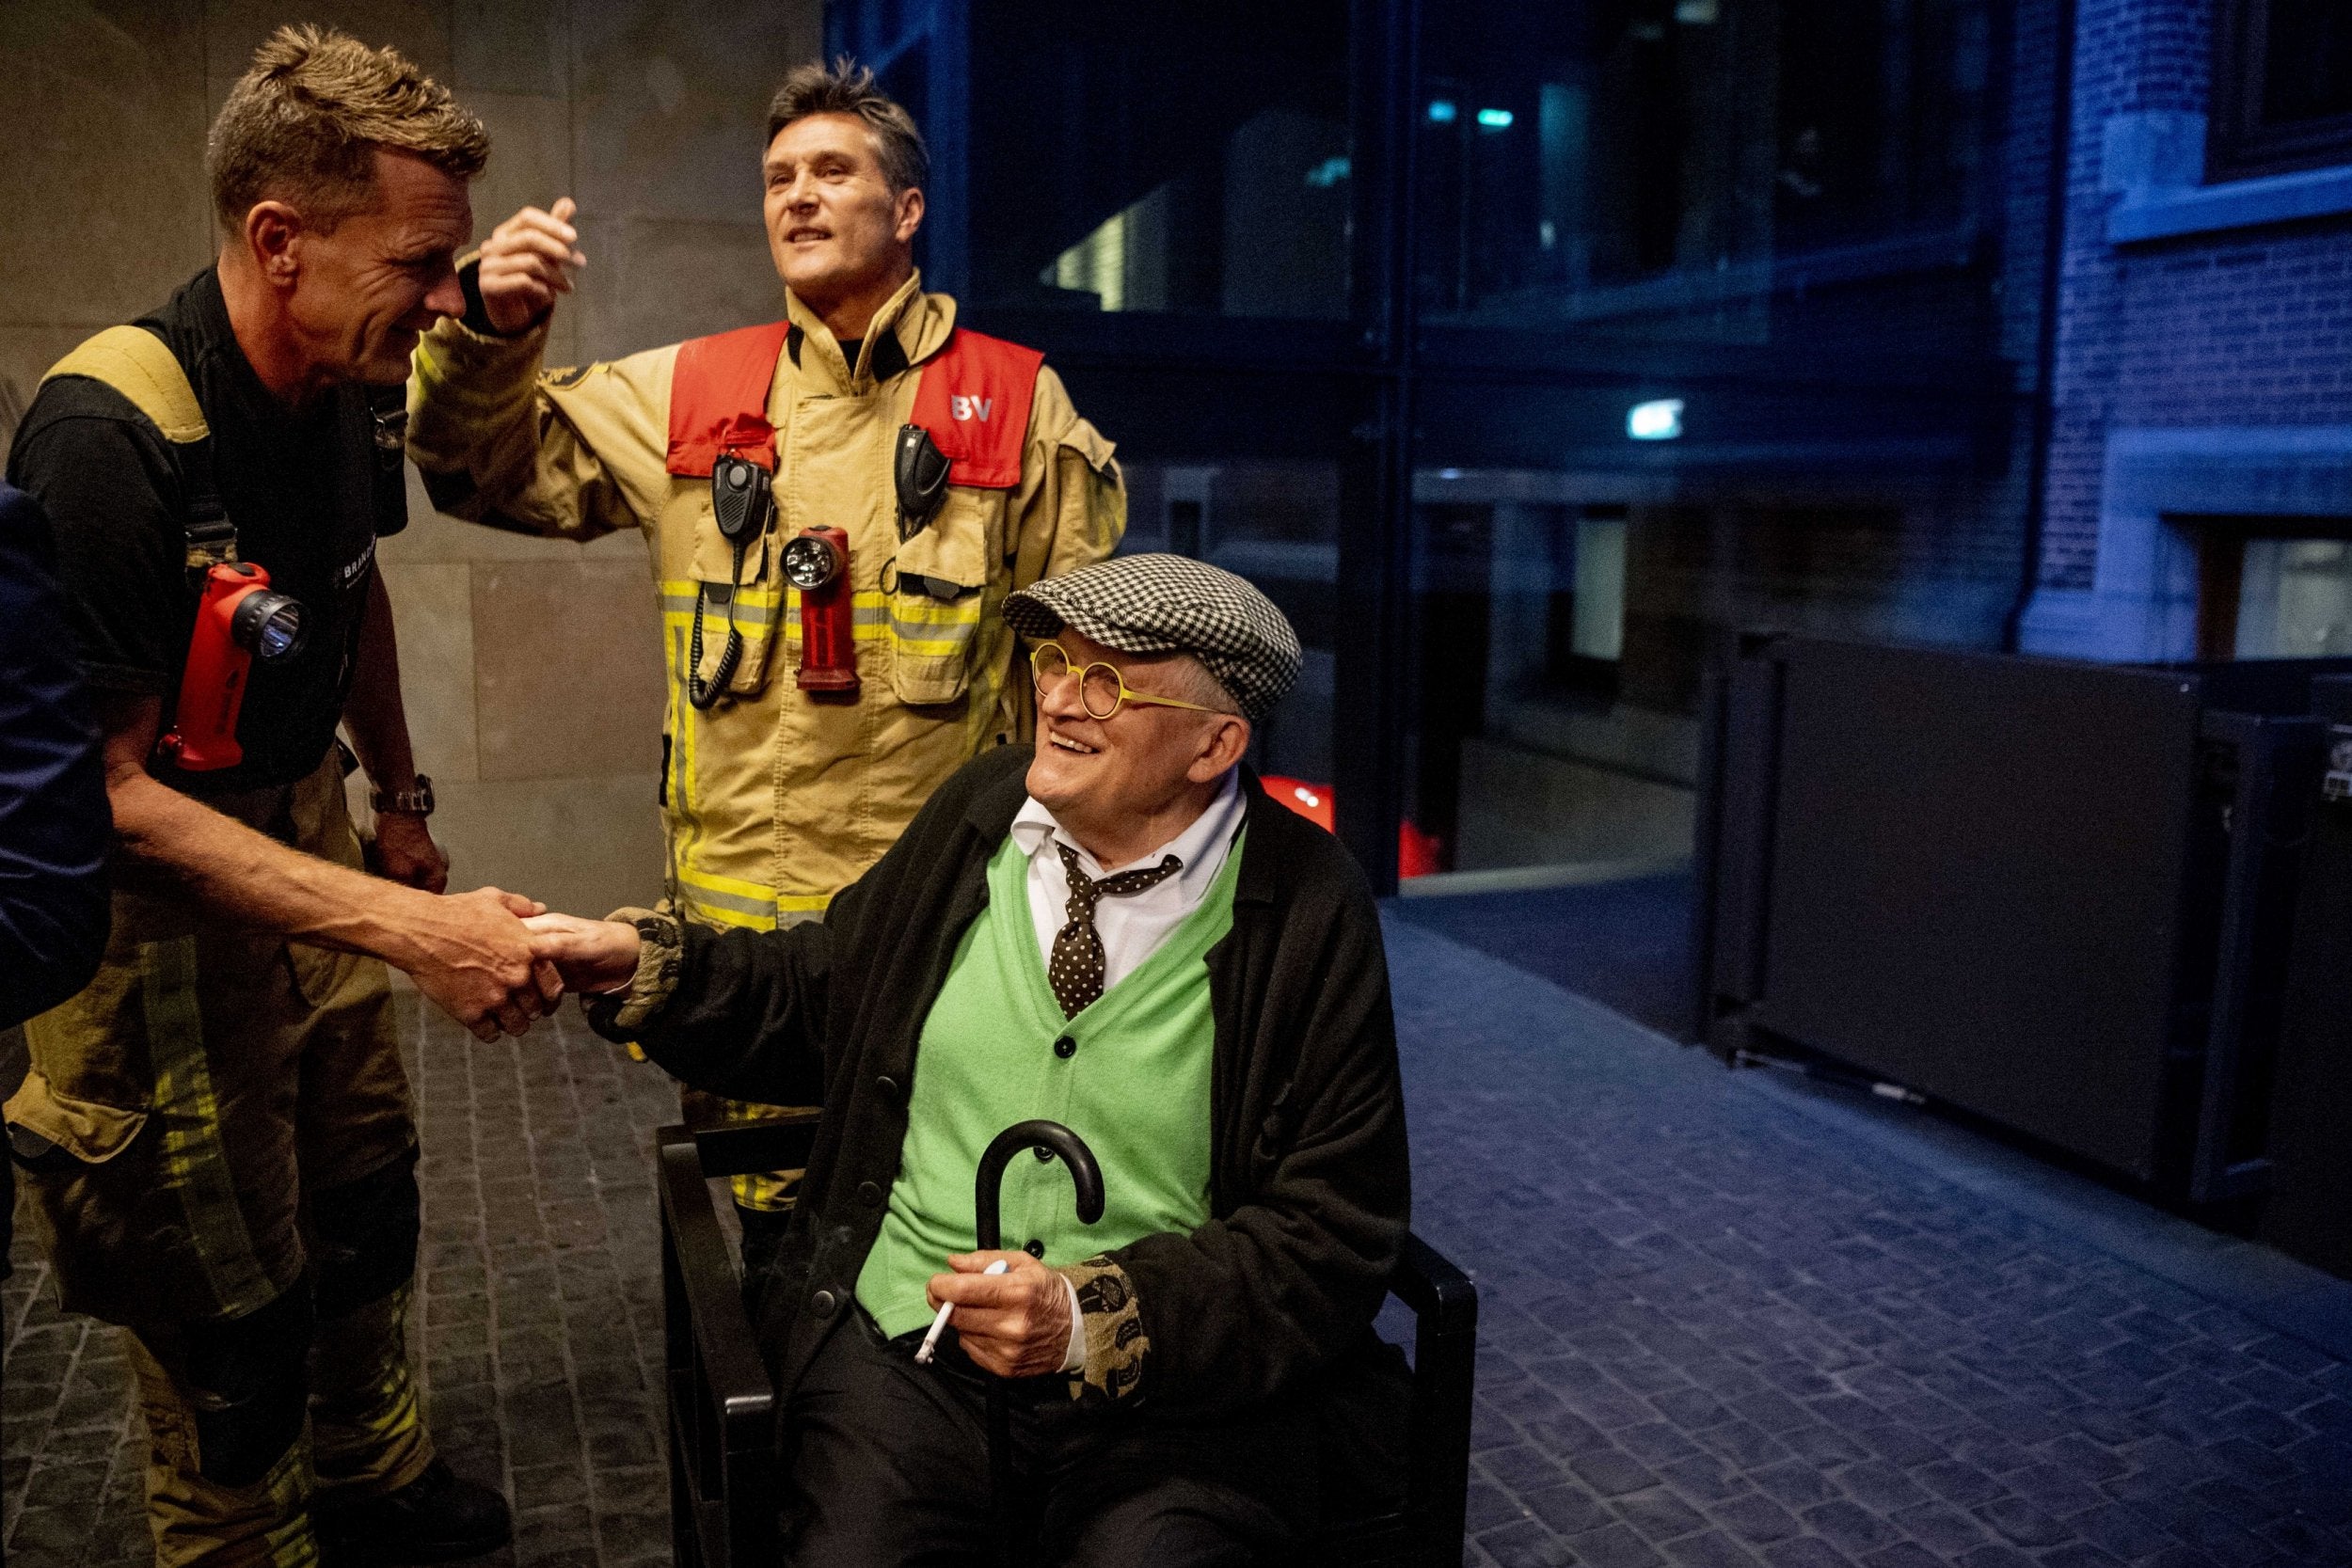 Hockney shakes hands with one of his rescuers